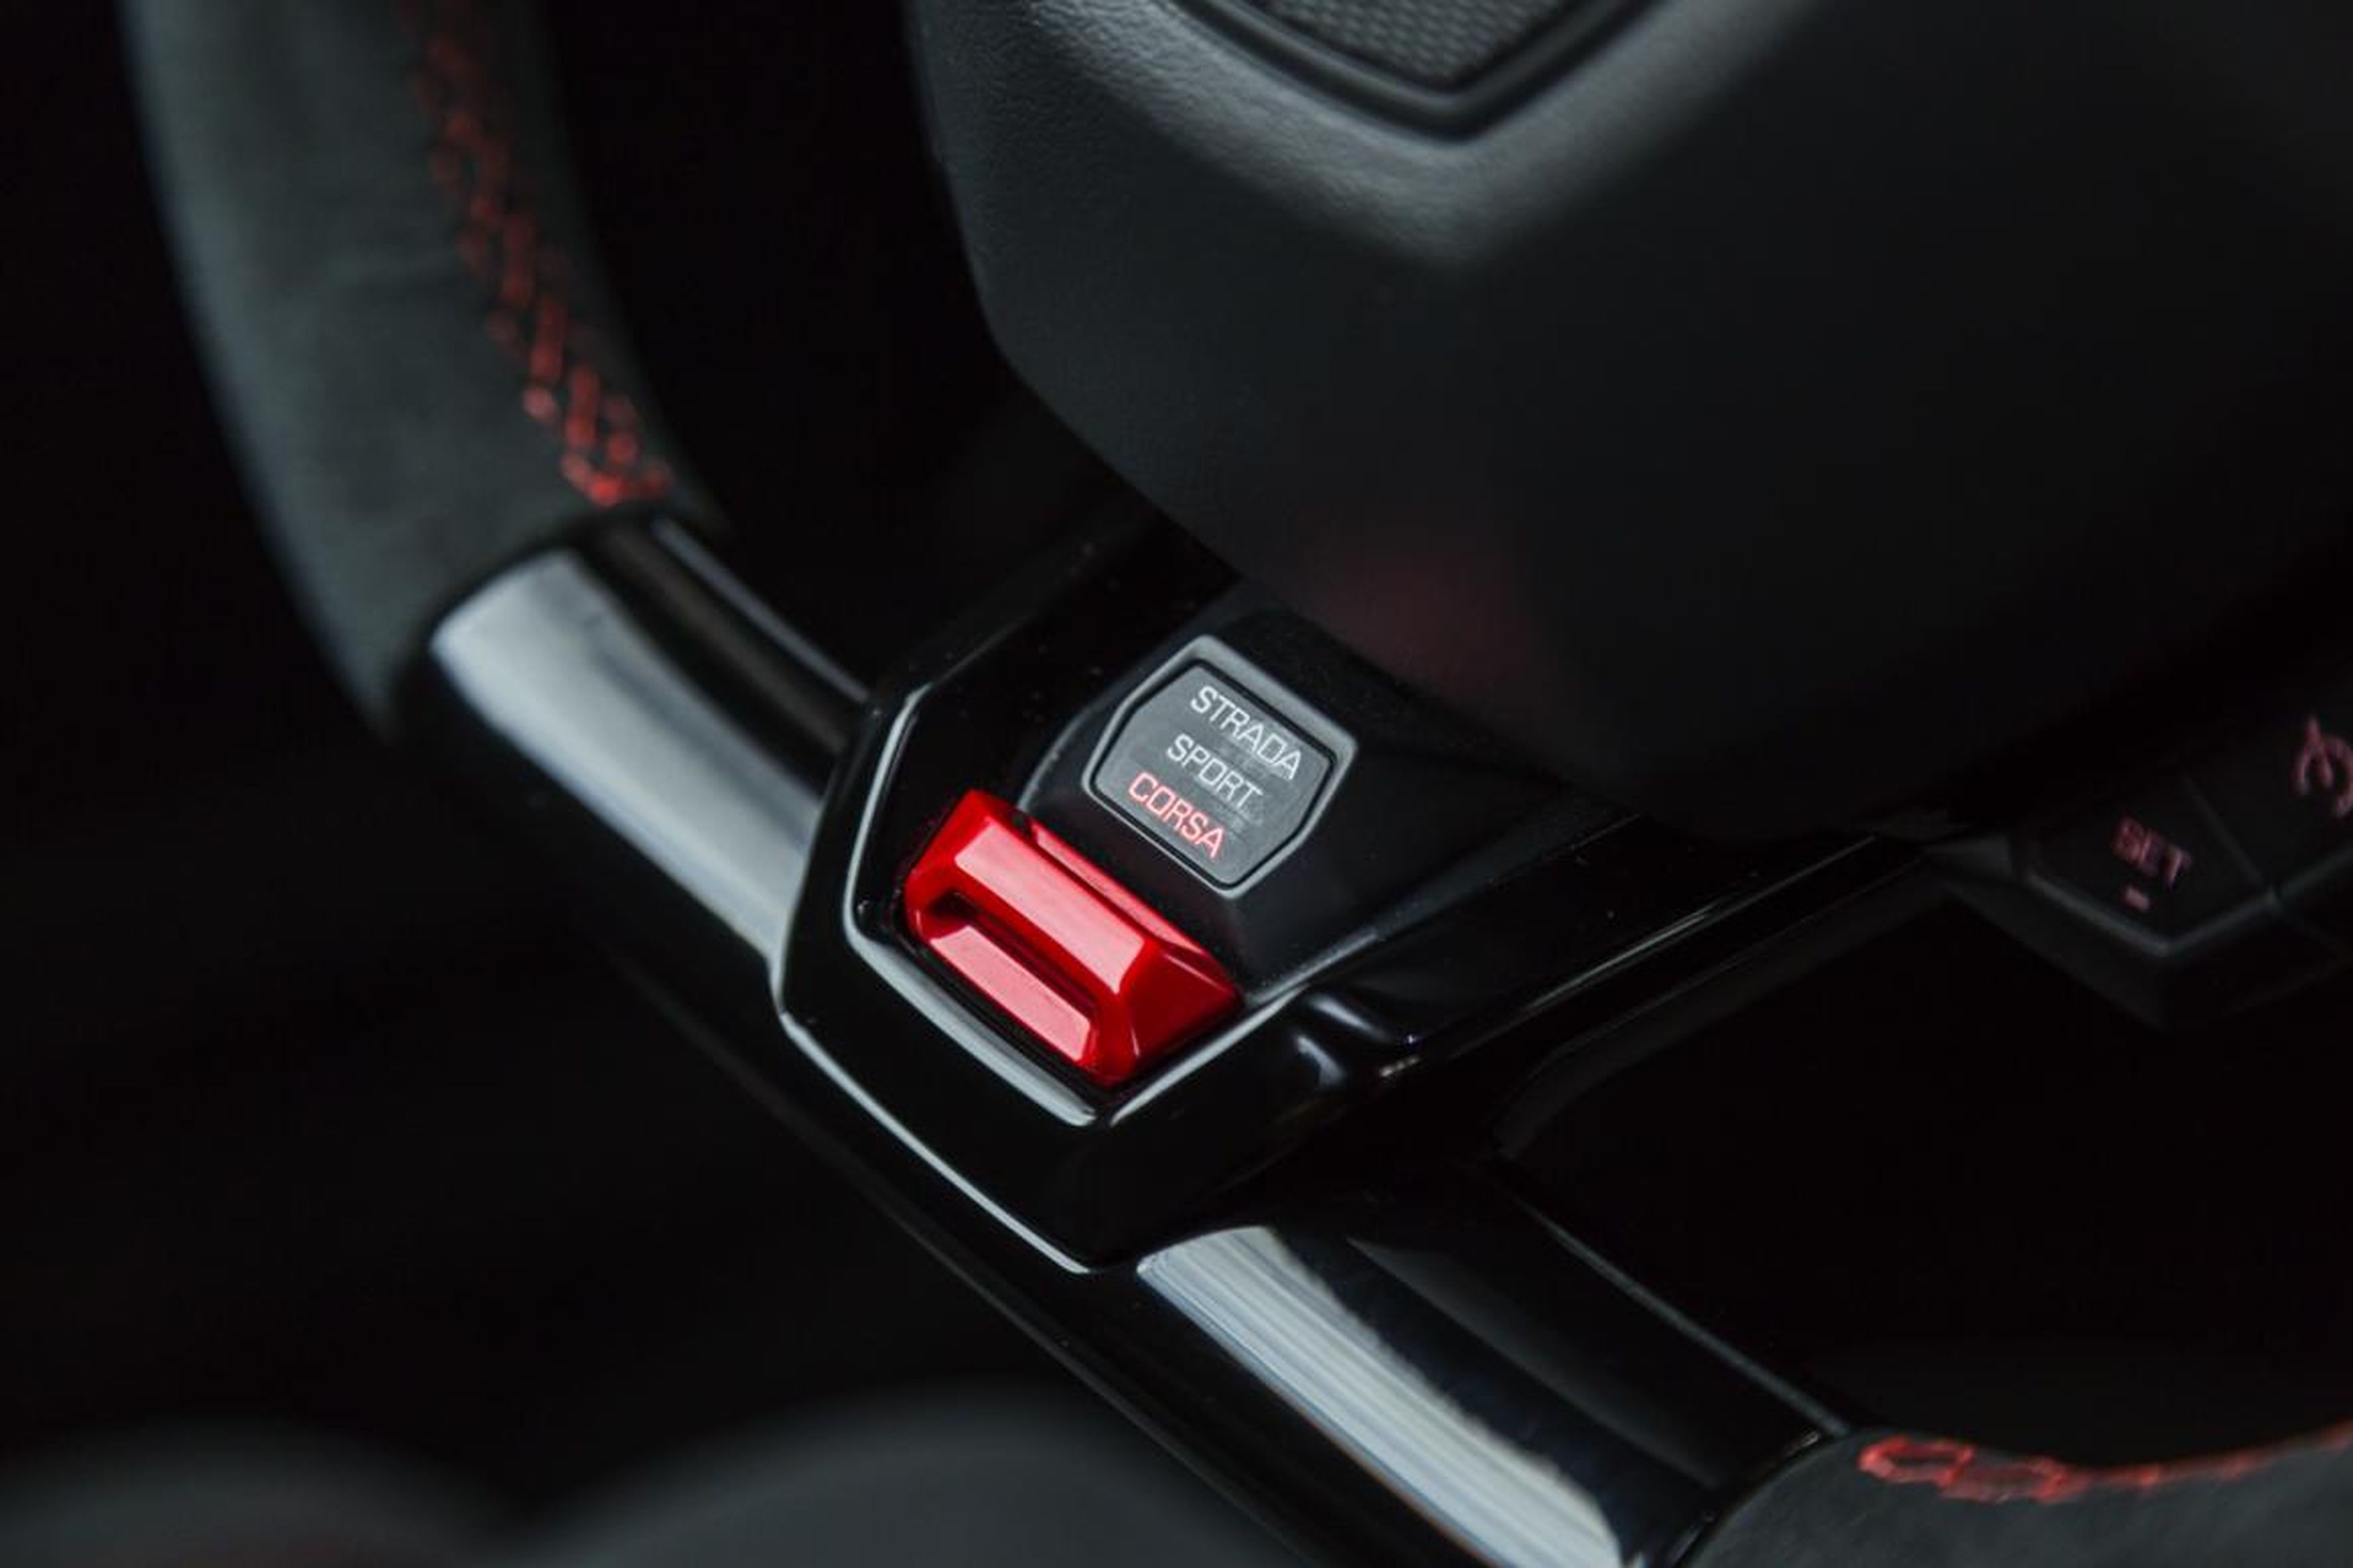 Driving modes are selected using the "anima" switch on the steering wheel. You have "Strada," "Sport," and "Corsa" to choose from.